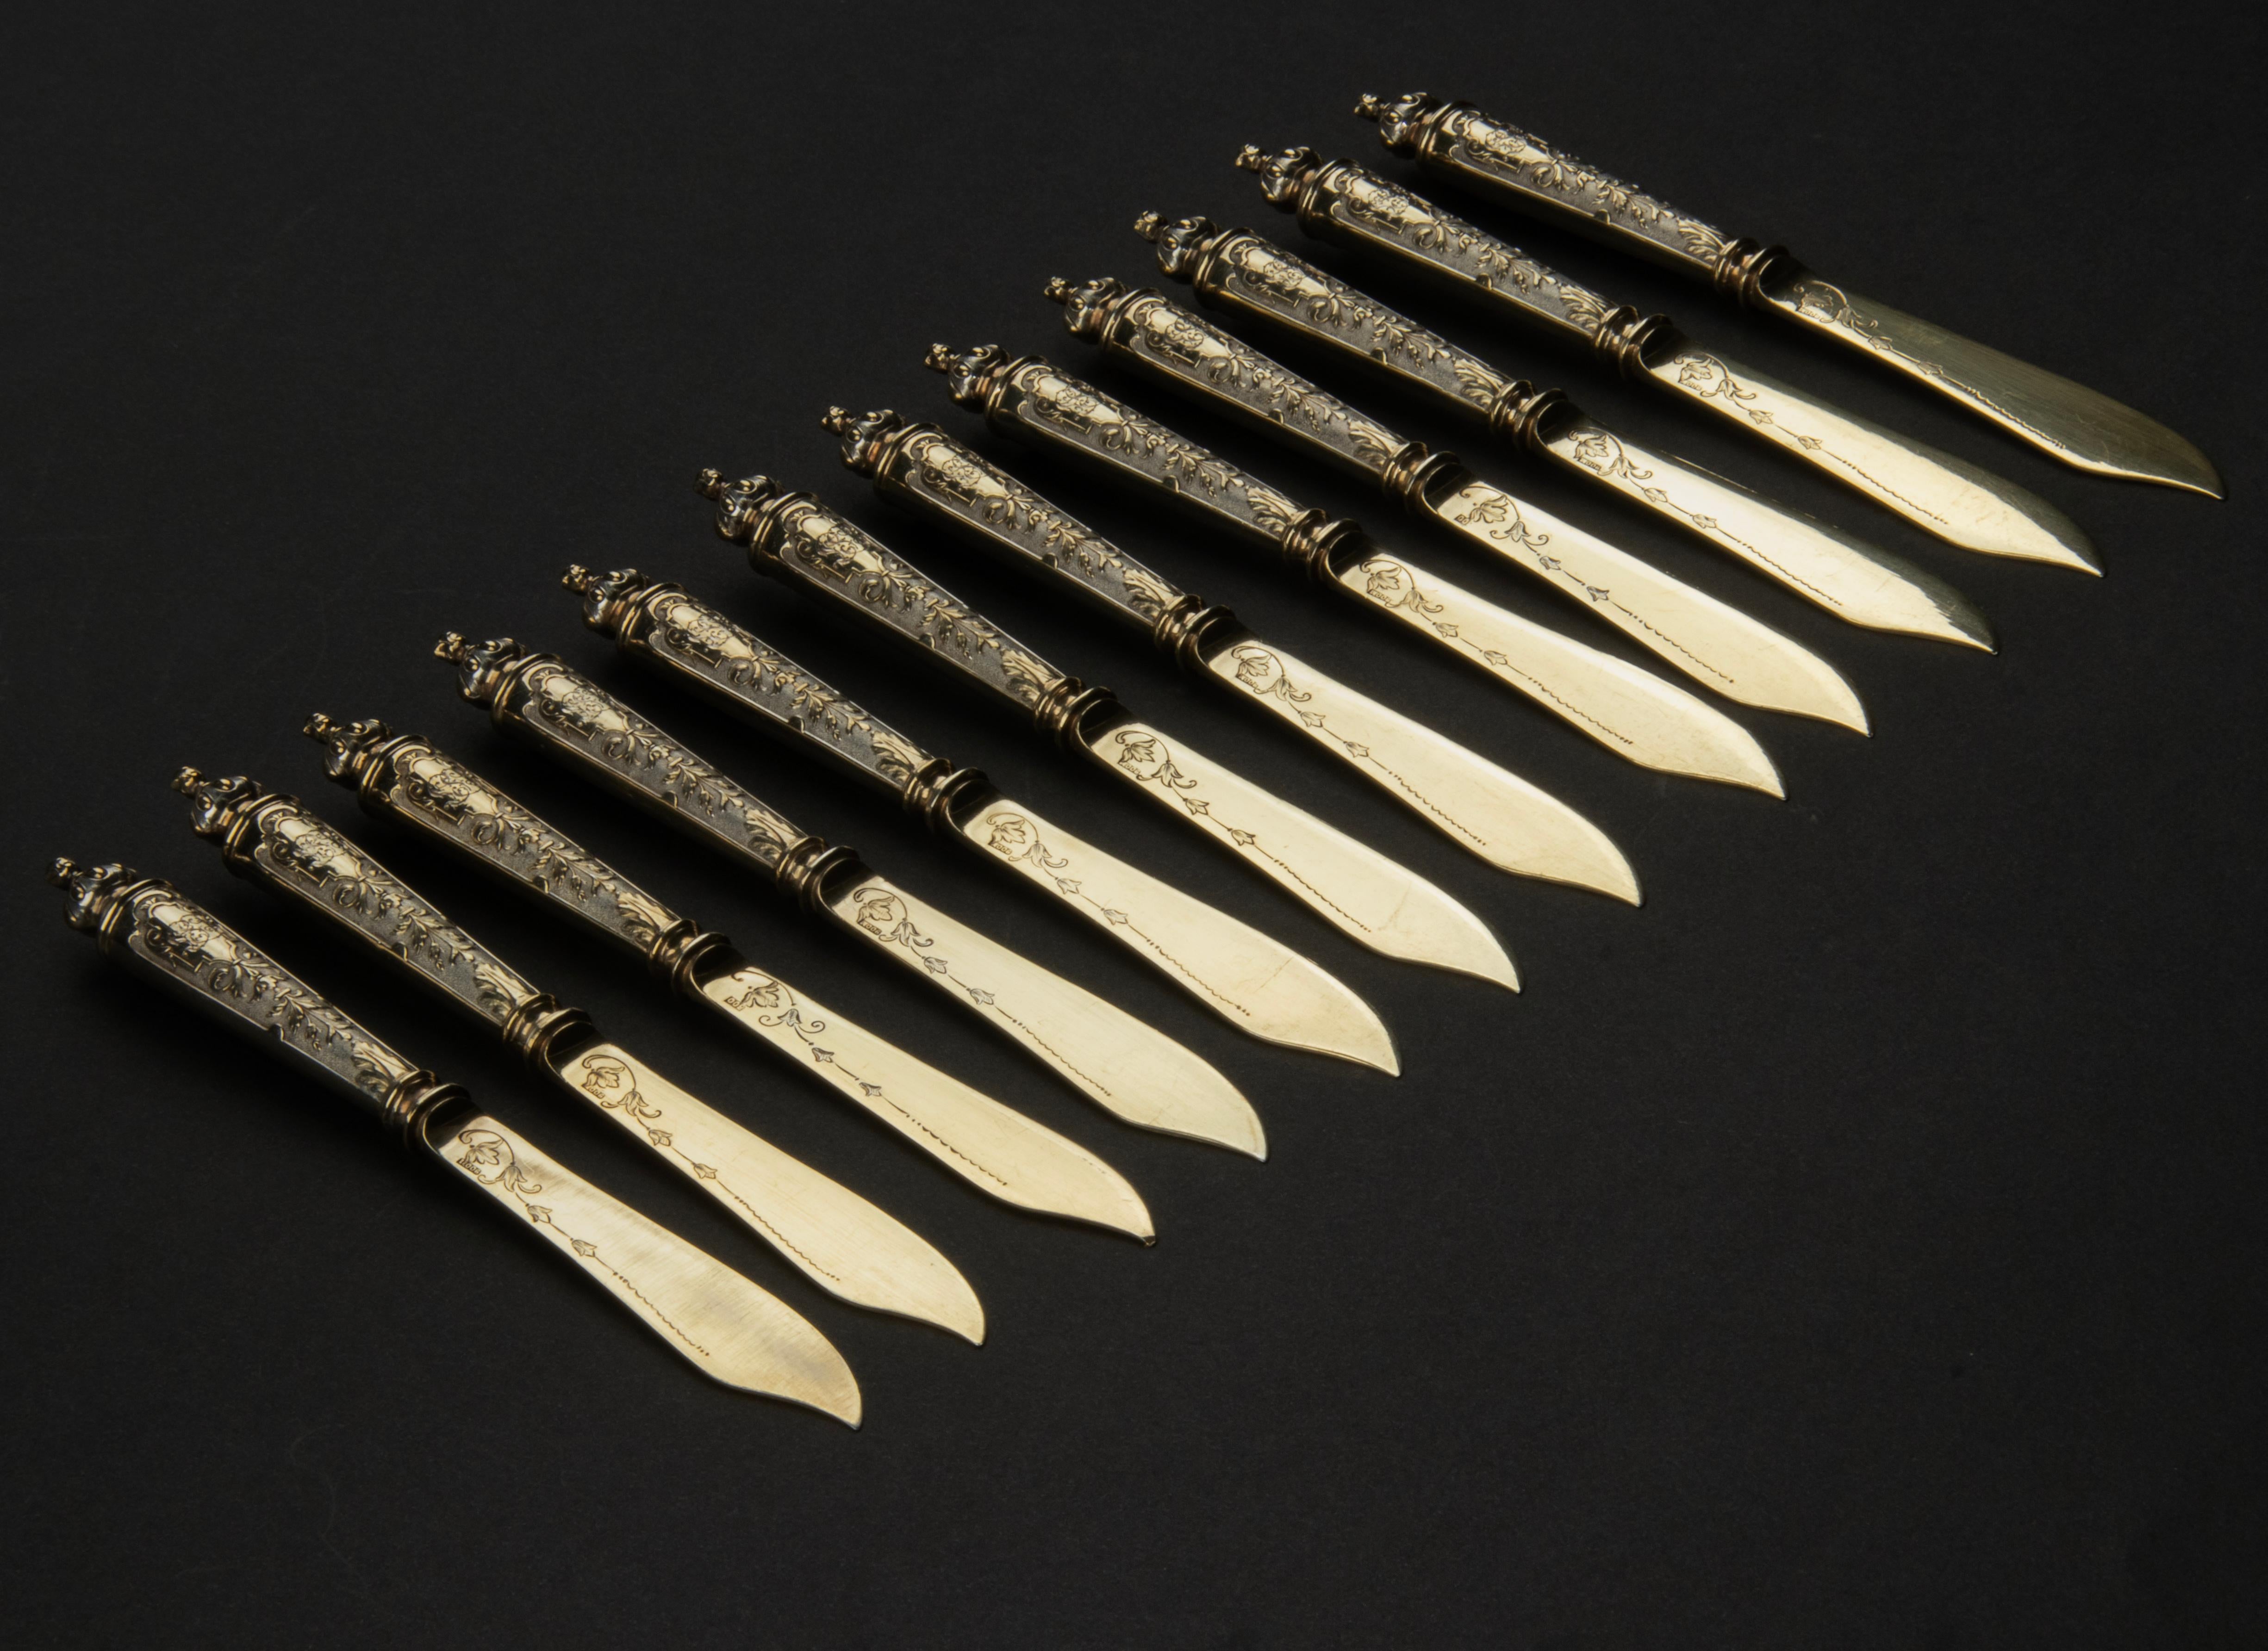 A lovely set of 12 silver butter knives. This cutlery is presumably French, dated 1896. The knives are marked 800. The knives are richly decorated with graceful motifs and nice cannon handles.
The knives are beautifully gilded, also called